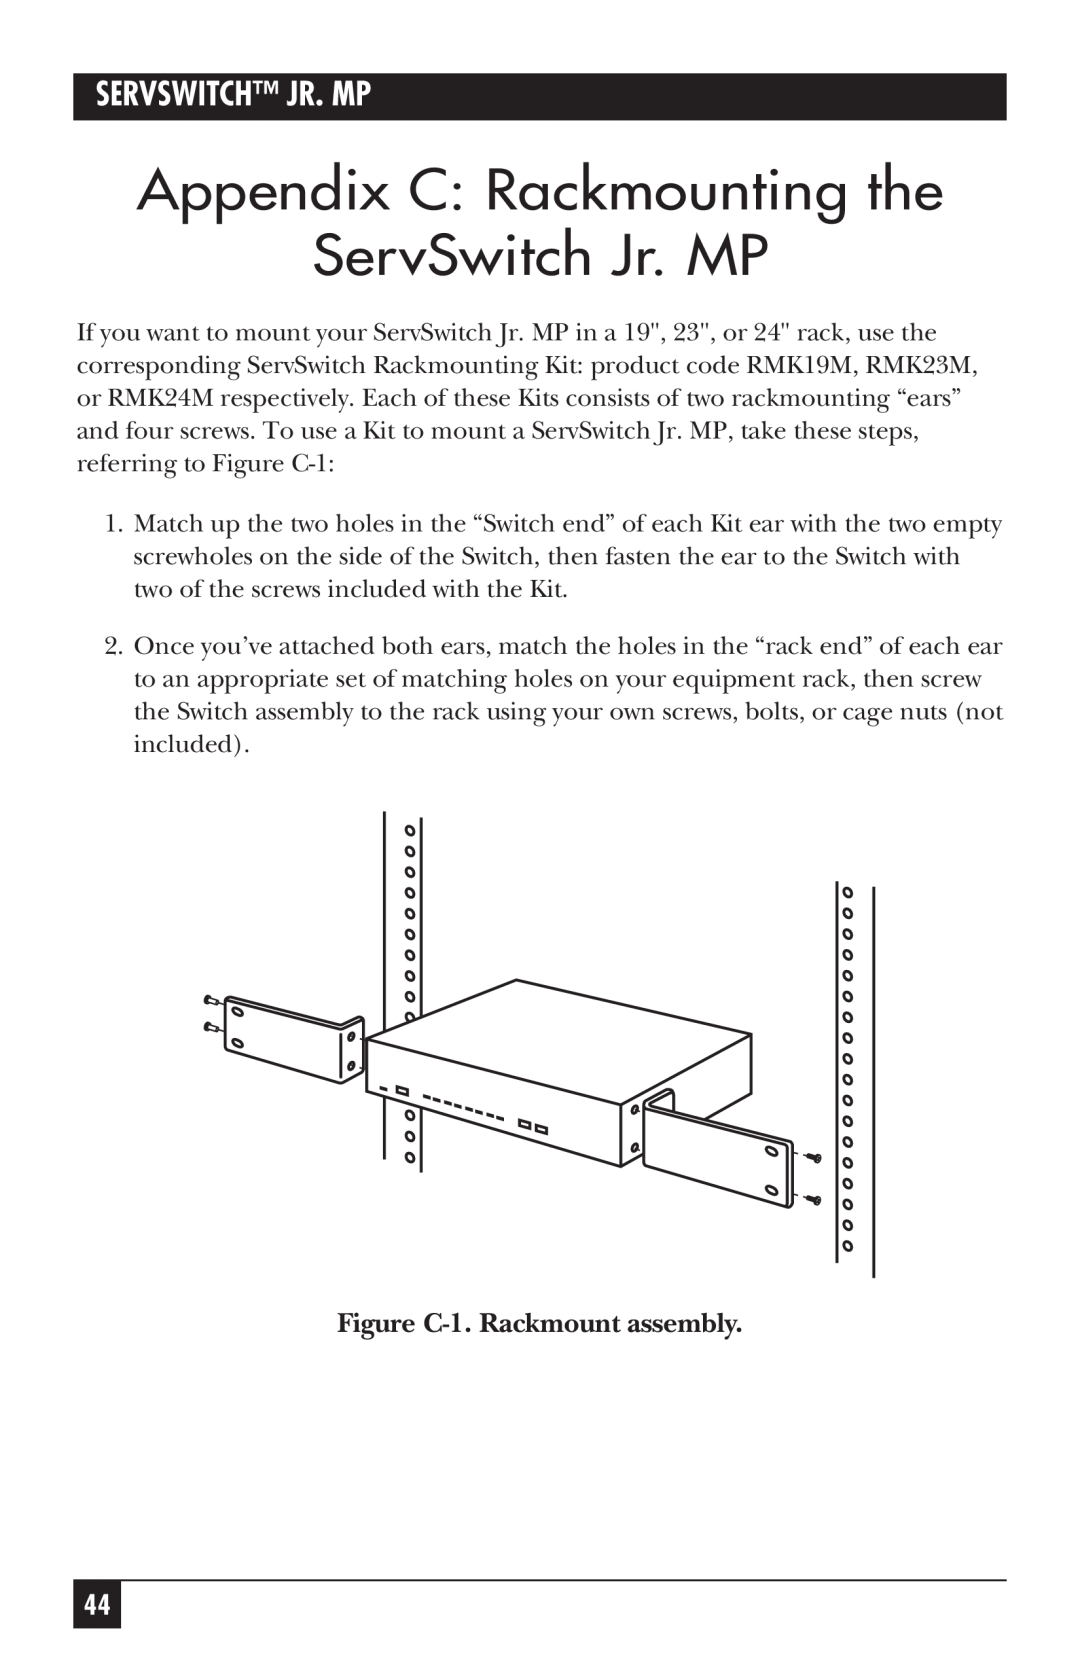 Black Box SW628A-R2 manual Appendix C Rackmounting the ServSwitch Jr. MP, Figure C-1. Rackmount assembly, Servswitch Jr. Mp 